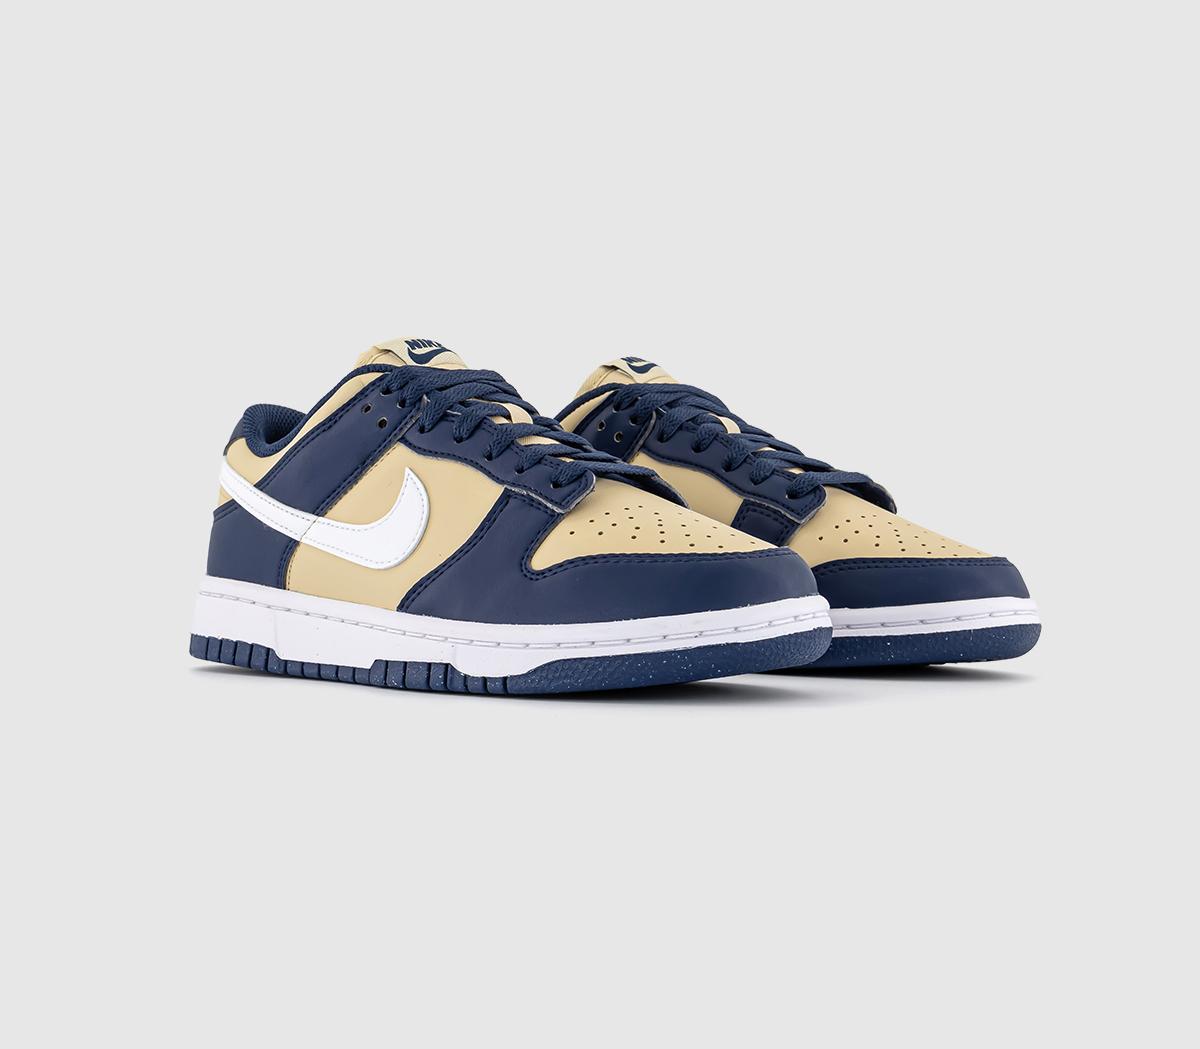 Nike Womens Dunk Low Trainers Midnight Navy White Team Gold Blue, 5.5